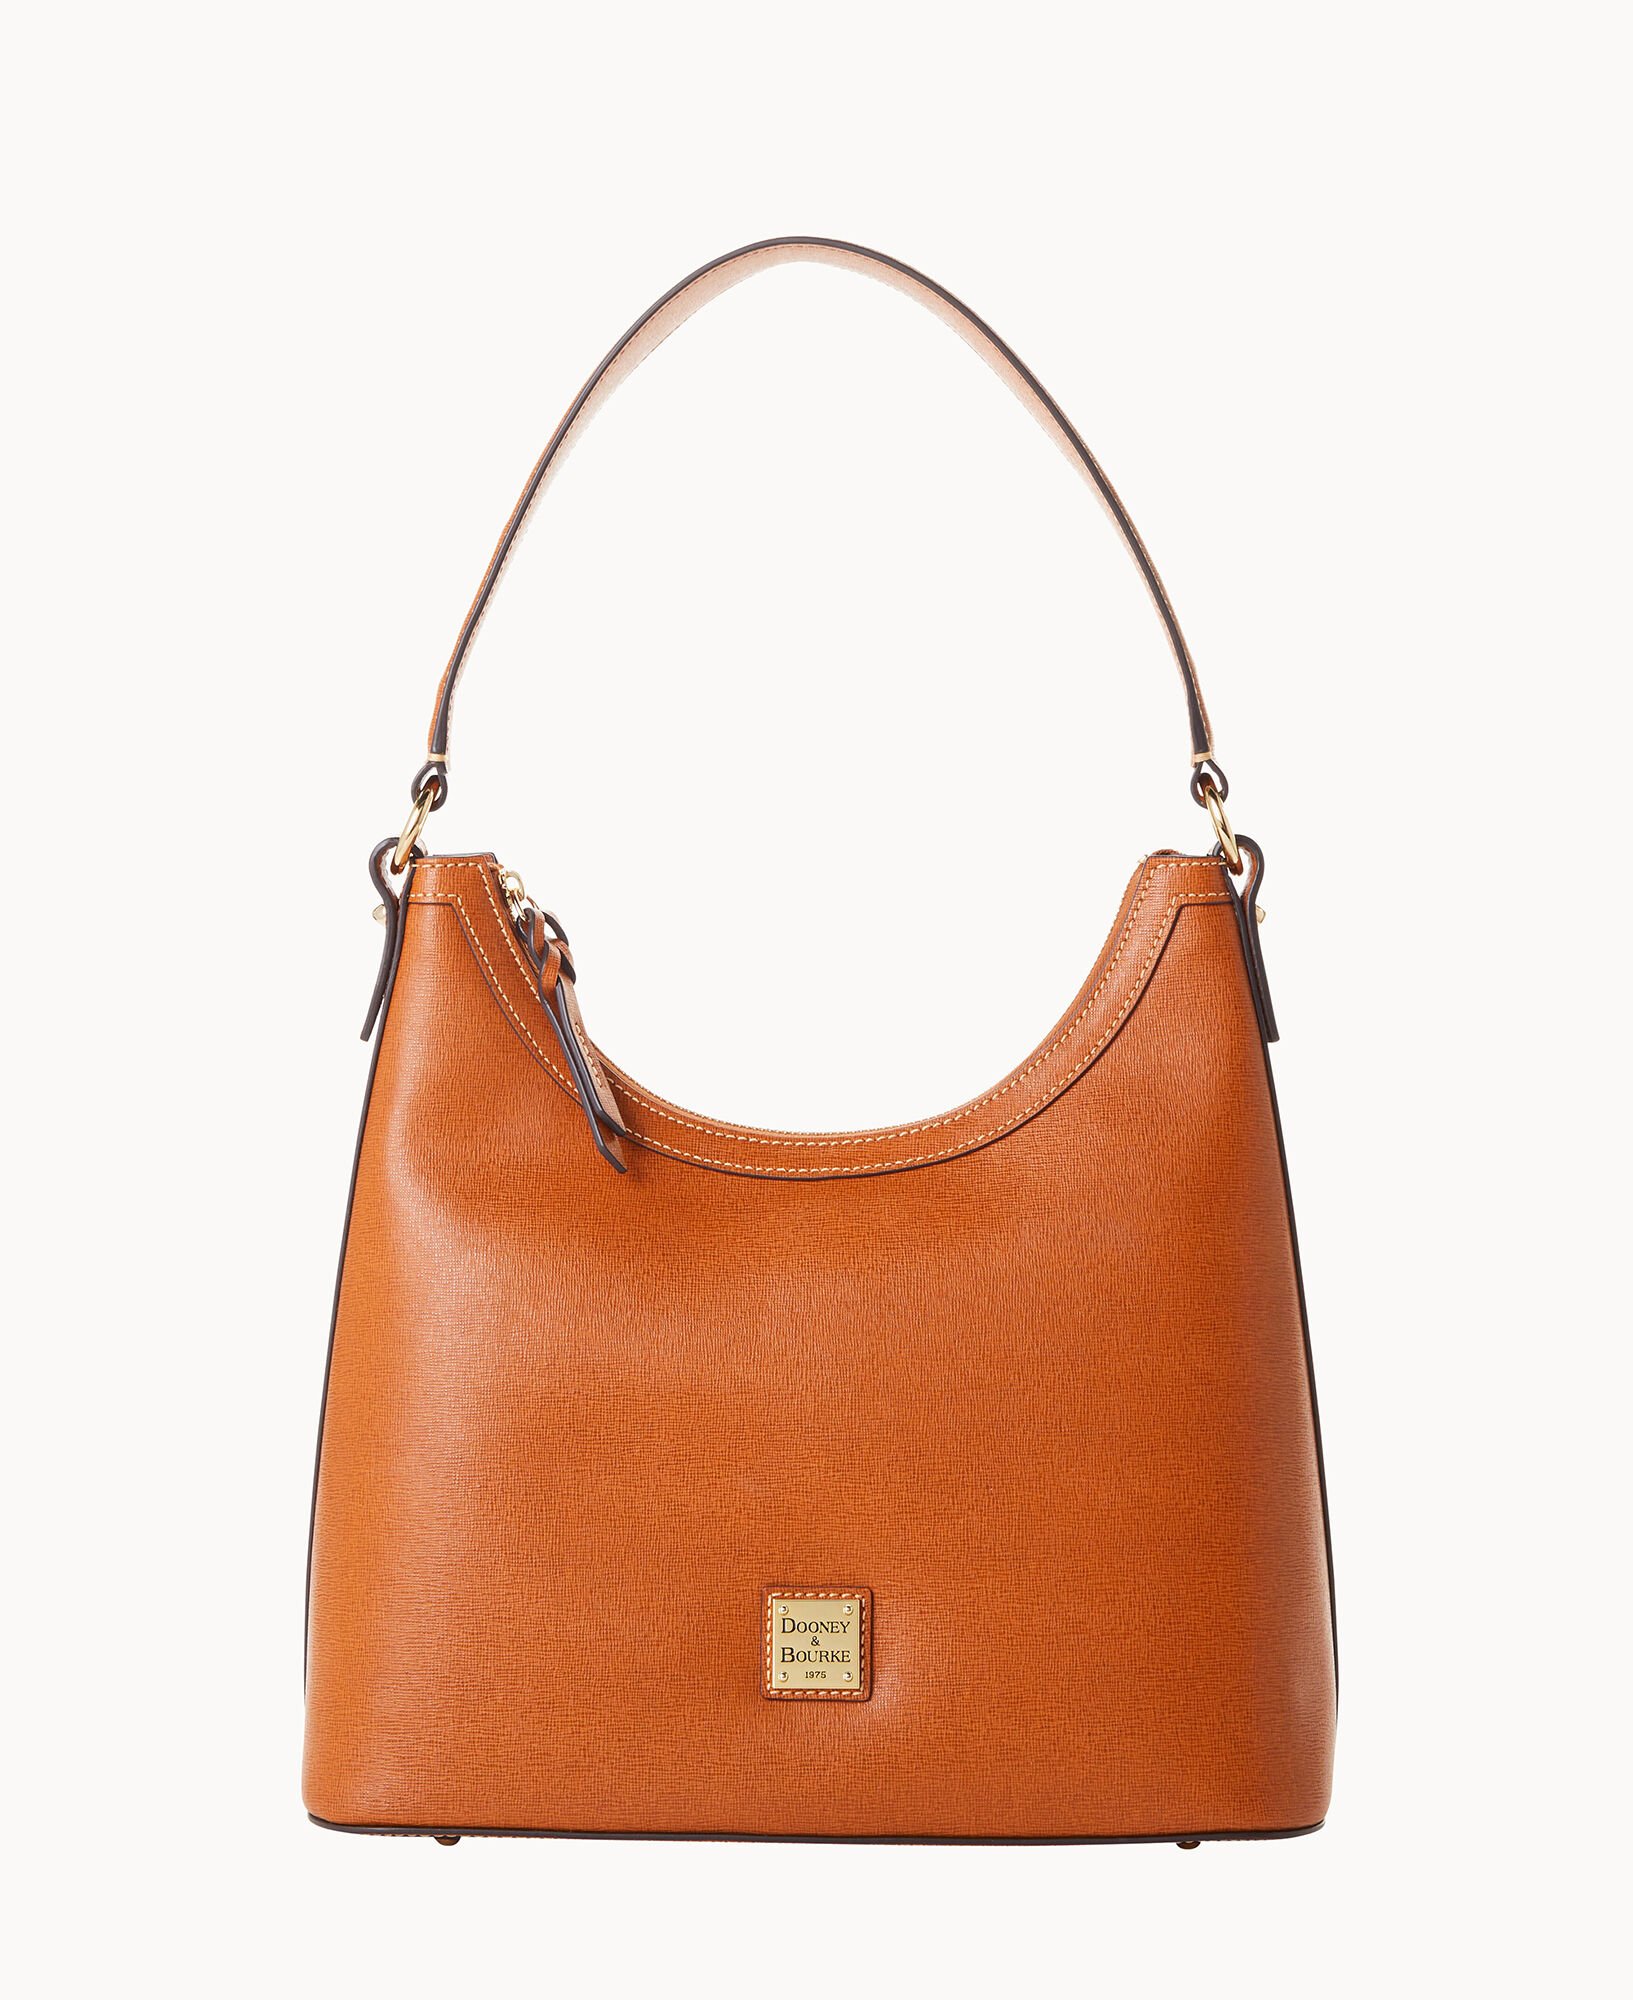 dooney and bourke saffiano leather